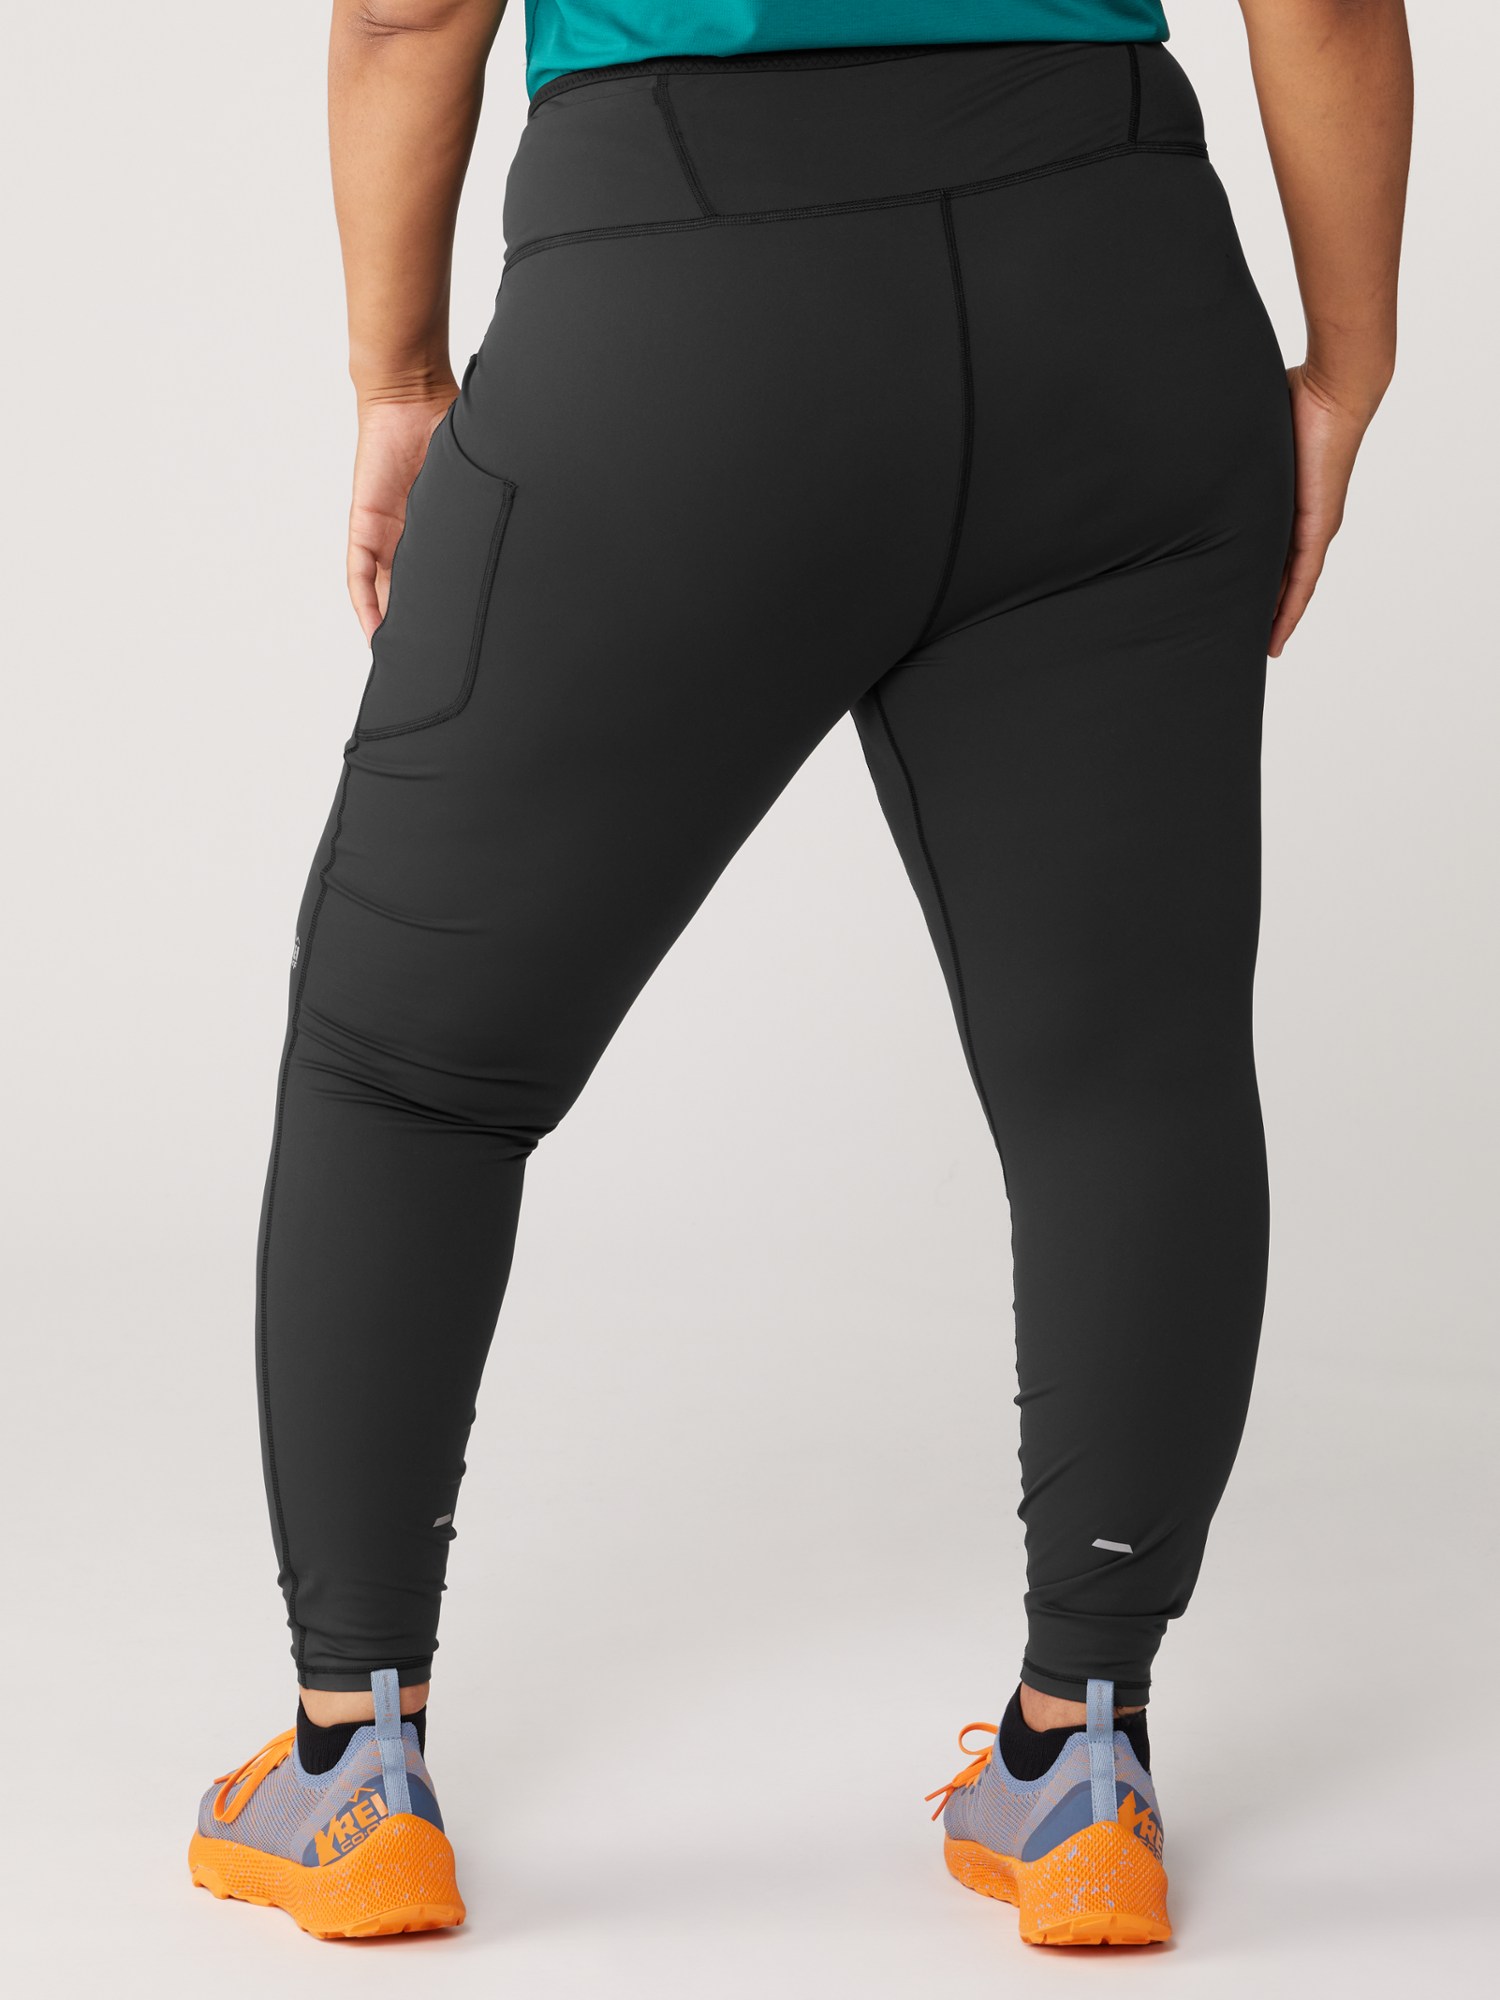 REI Co-op Swiftland Thermal Running Tights - Women's